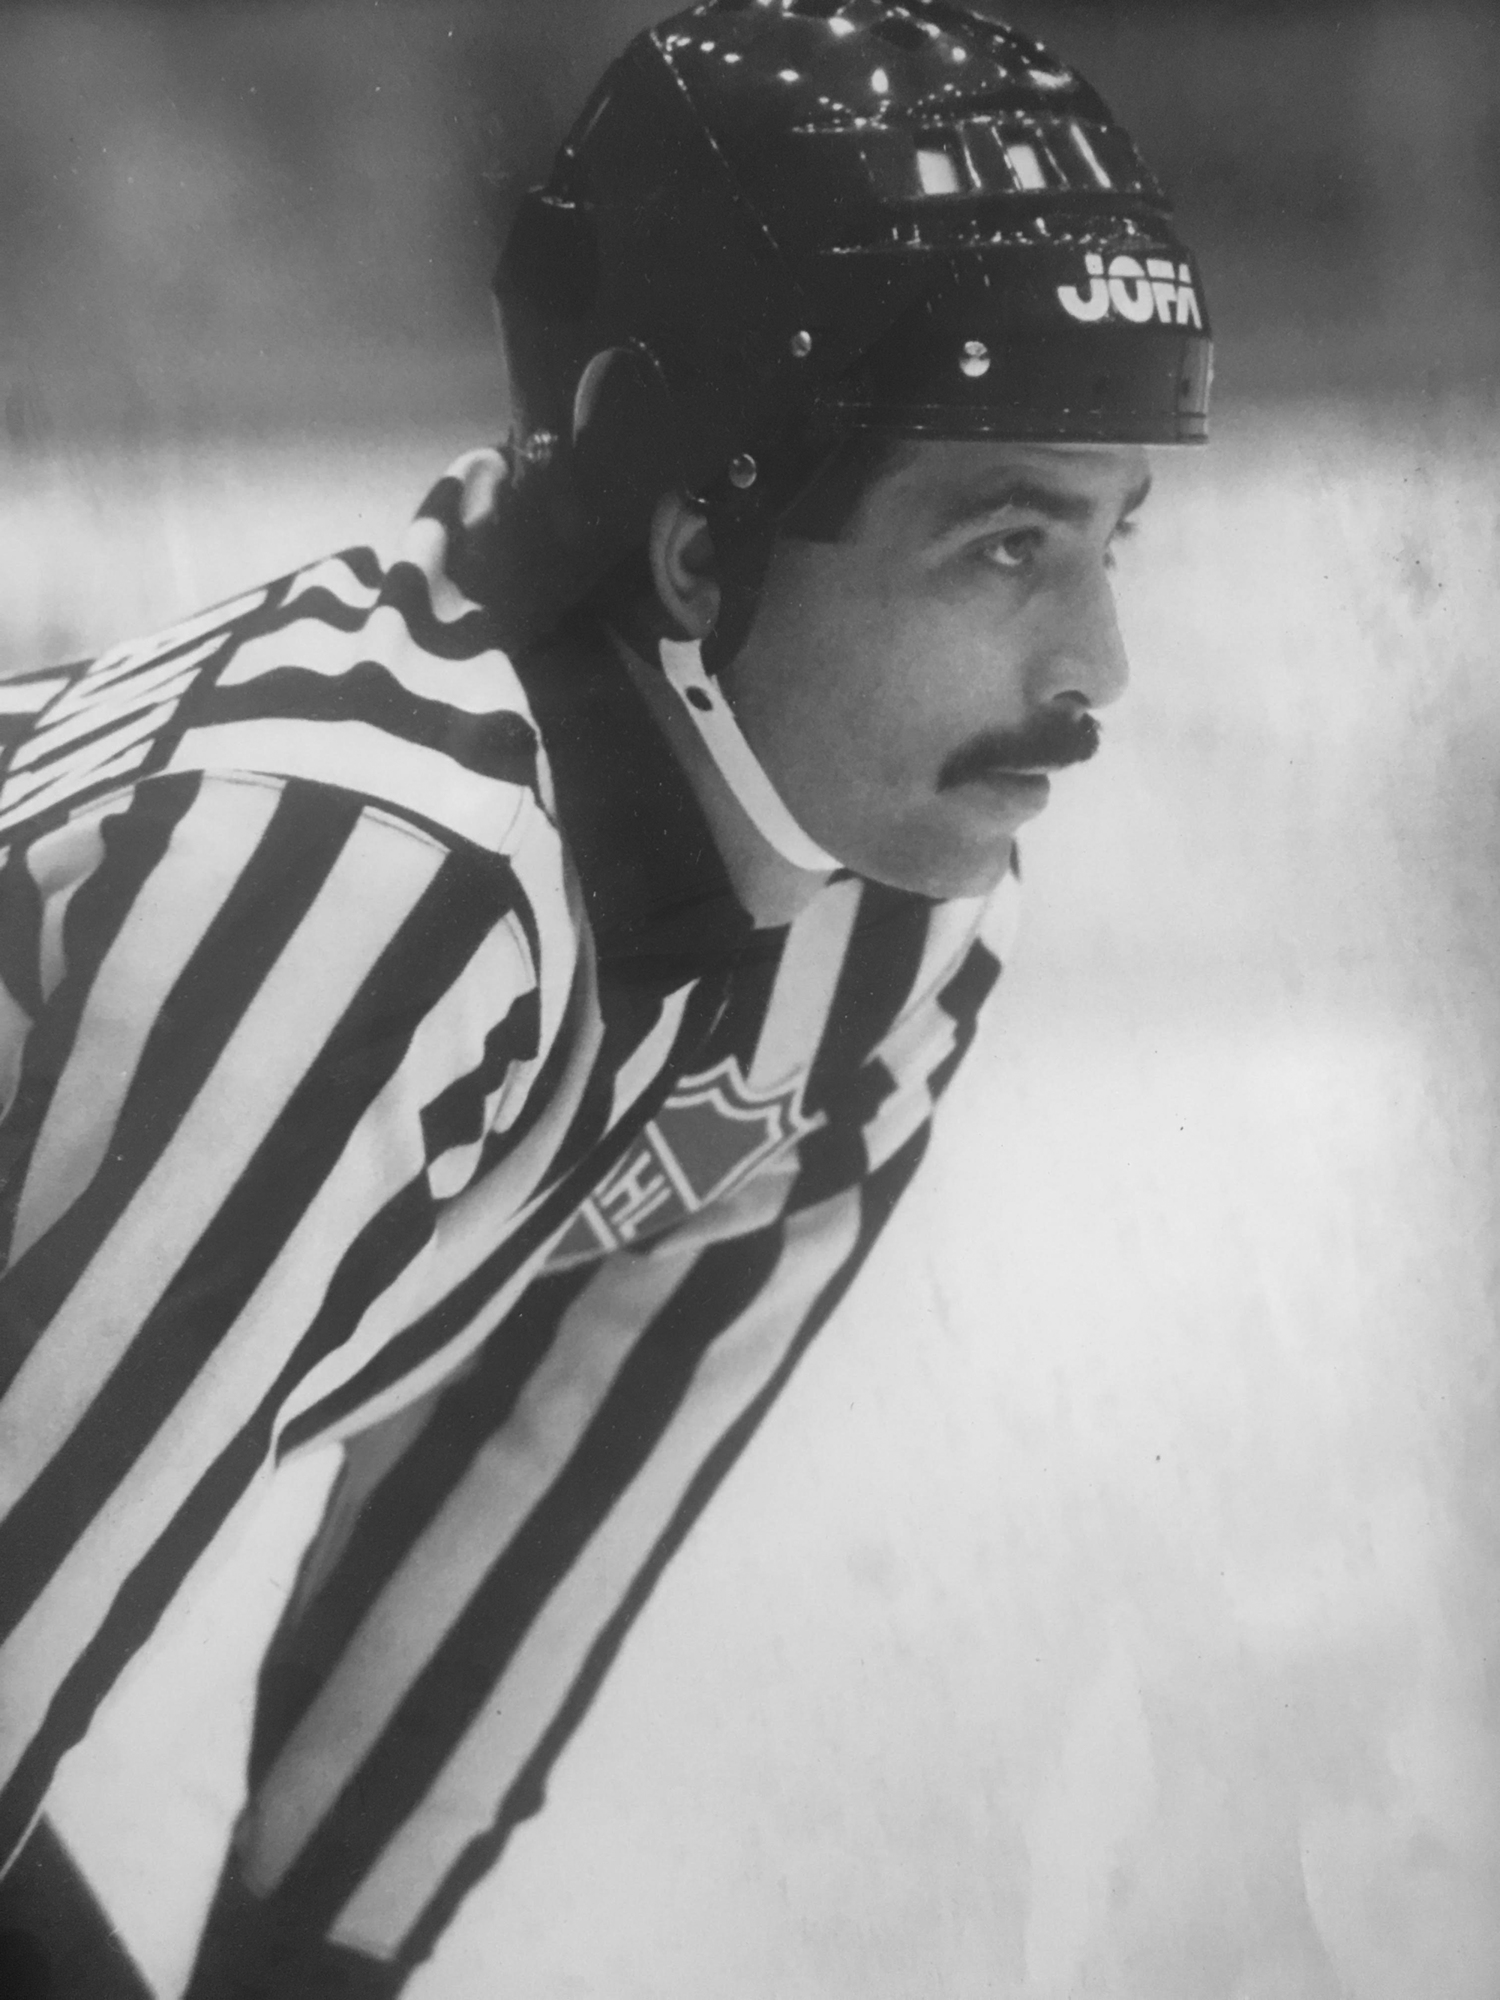 Bill Daubmann was a top-ranked American Hockey League referee until a family illness compelled him to become an entrepreneur to meet expenses and leave his hockey career as a result. Courtesy Bill Daubmann